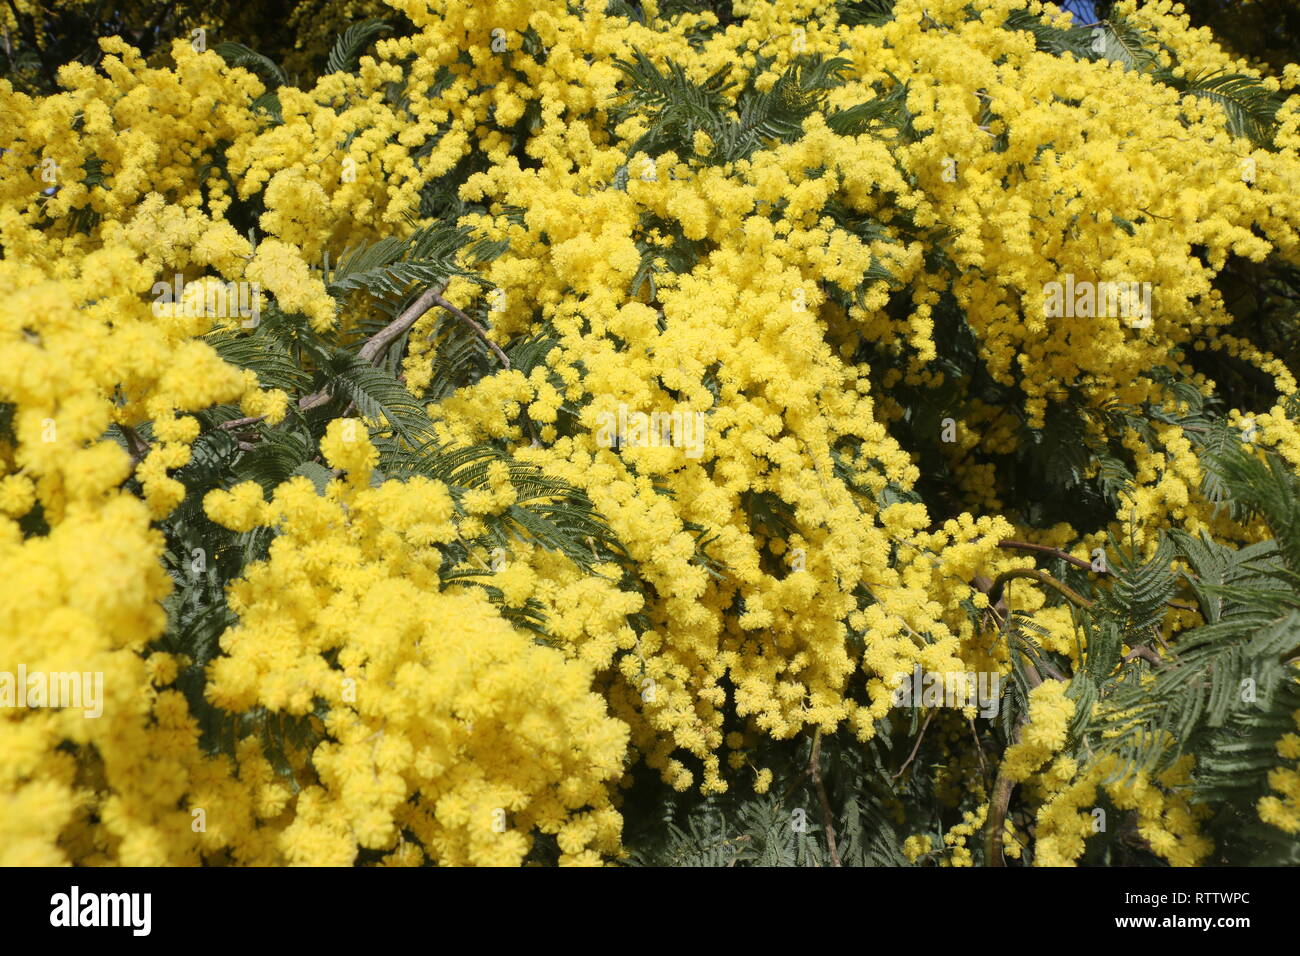 Numerous yellow wildflowers captured at the begining of spring time, at daylight, immersed and submerged in the middle of this many beautiful flowers Stock Photo